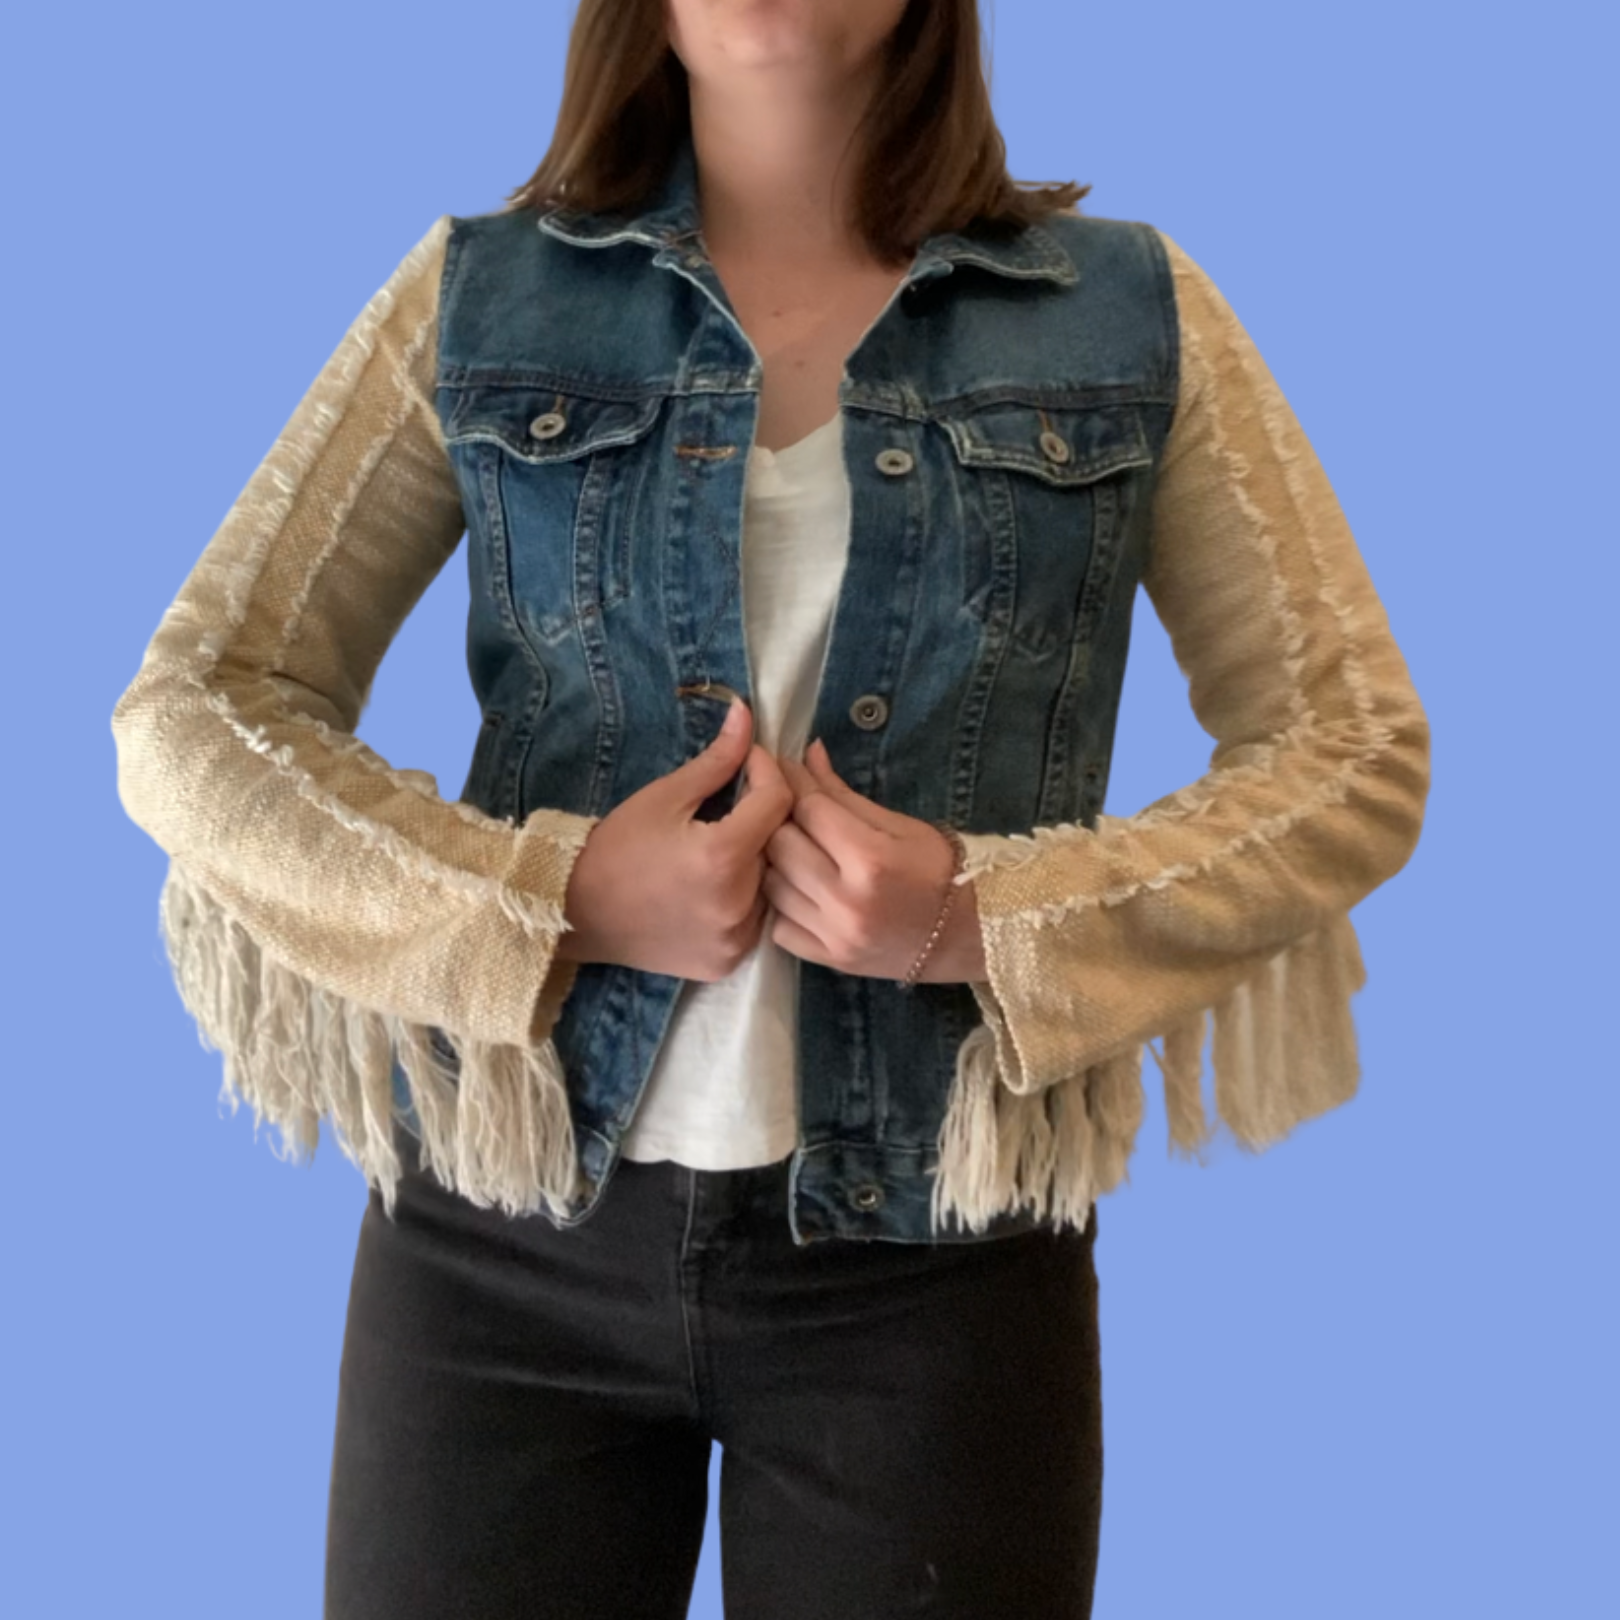 A woman wearing a denim jacket with fringe sleeves.